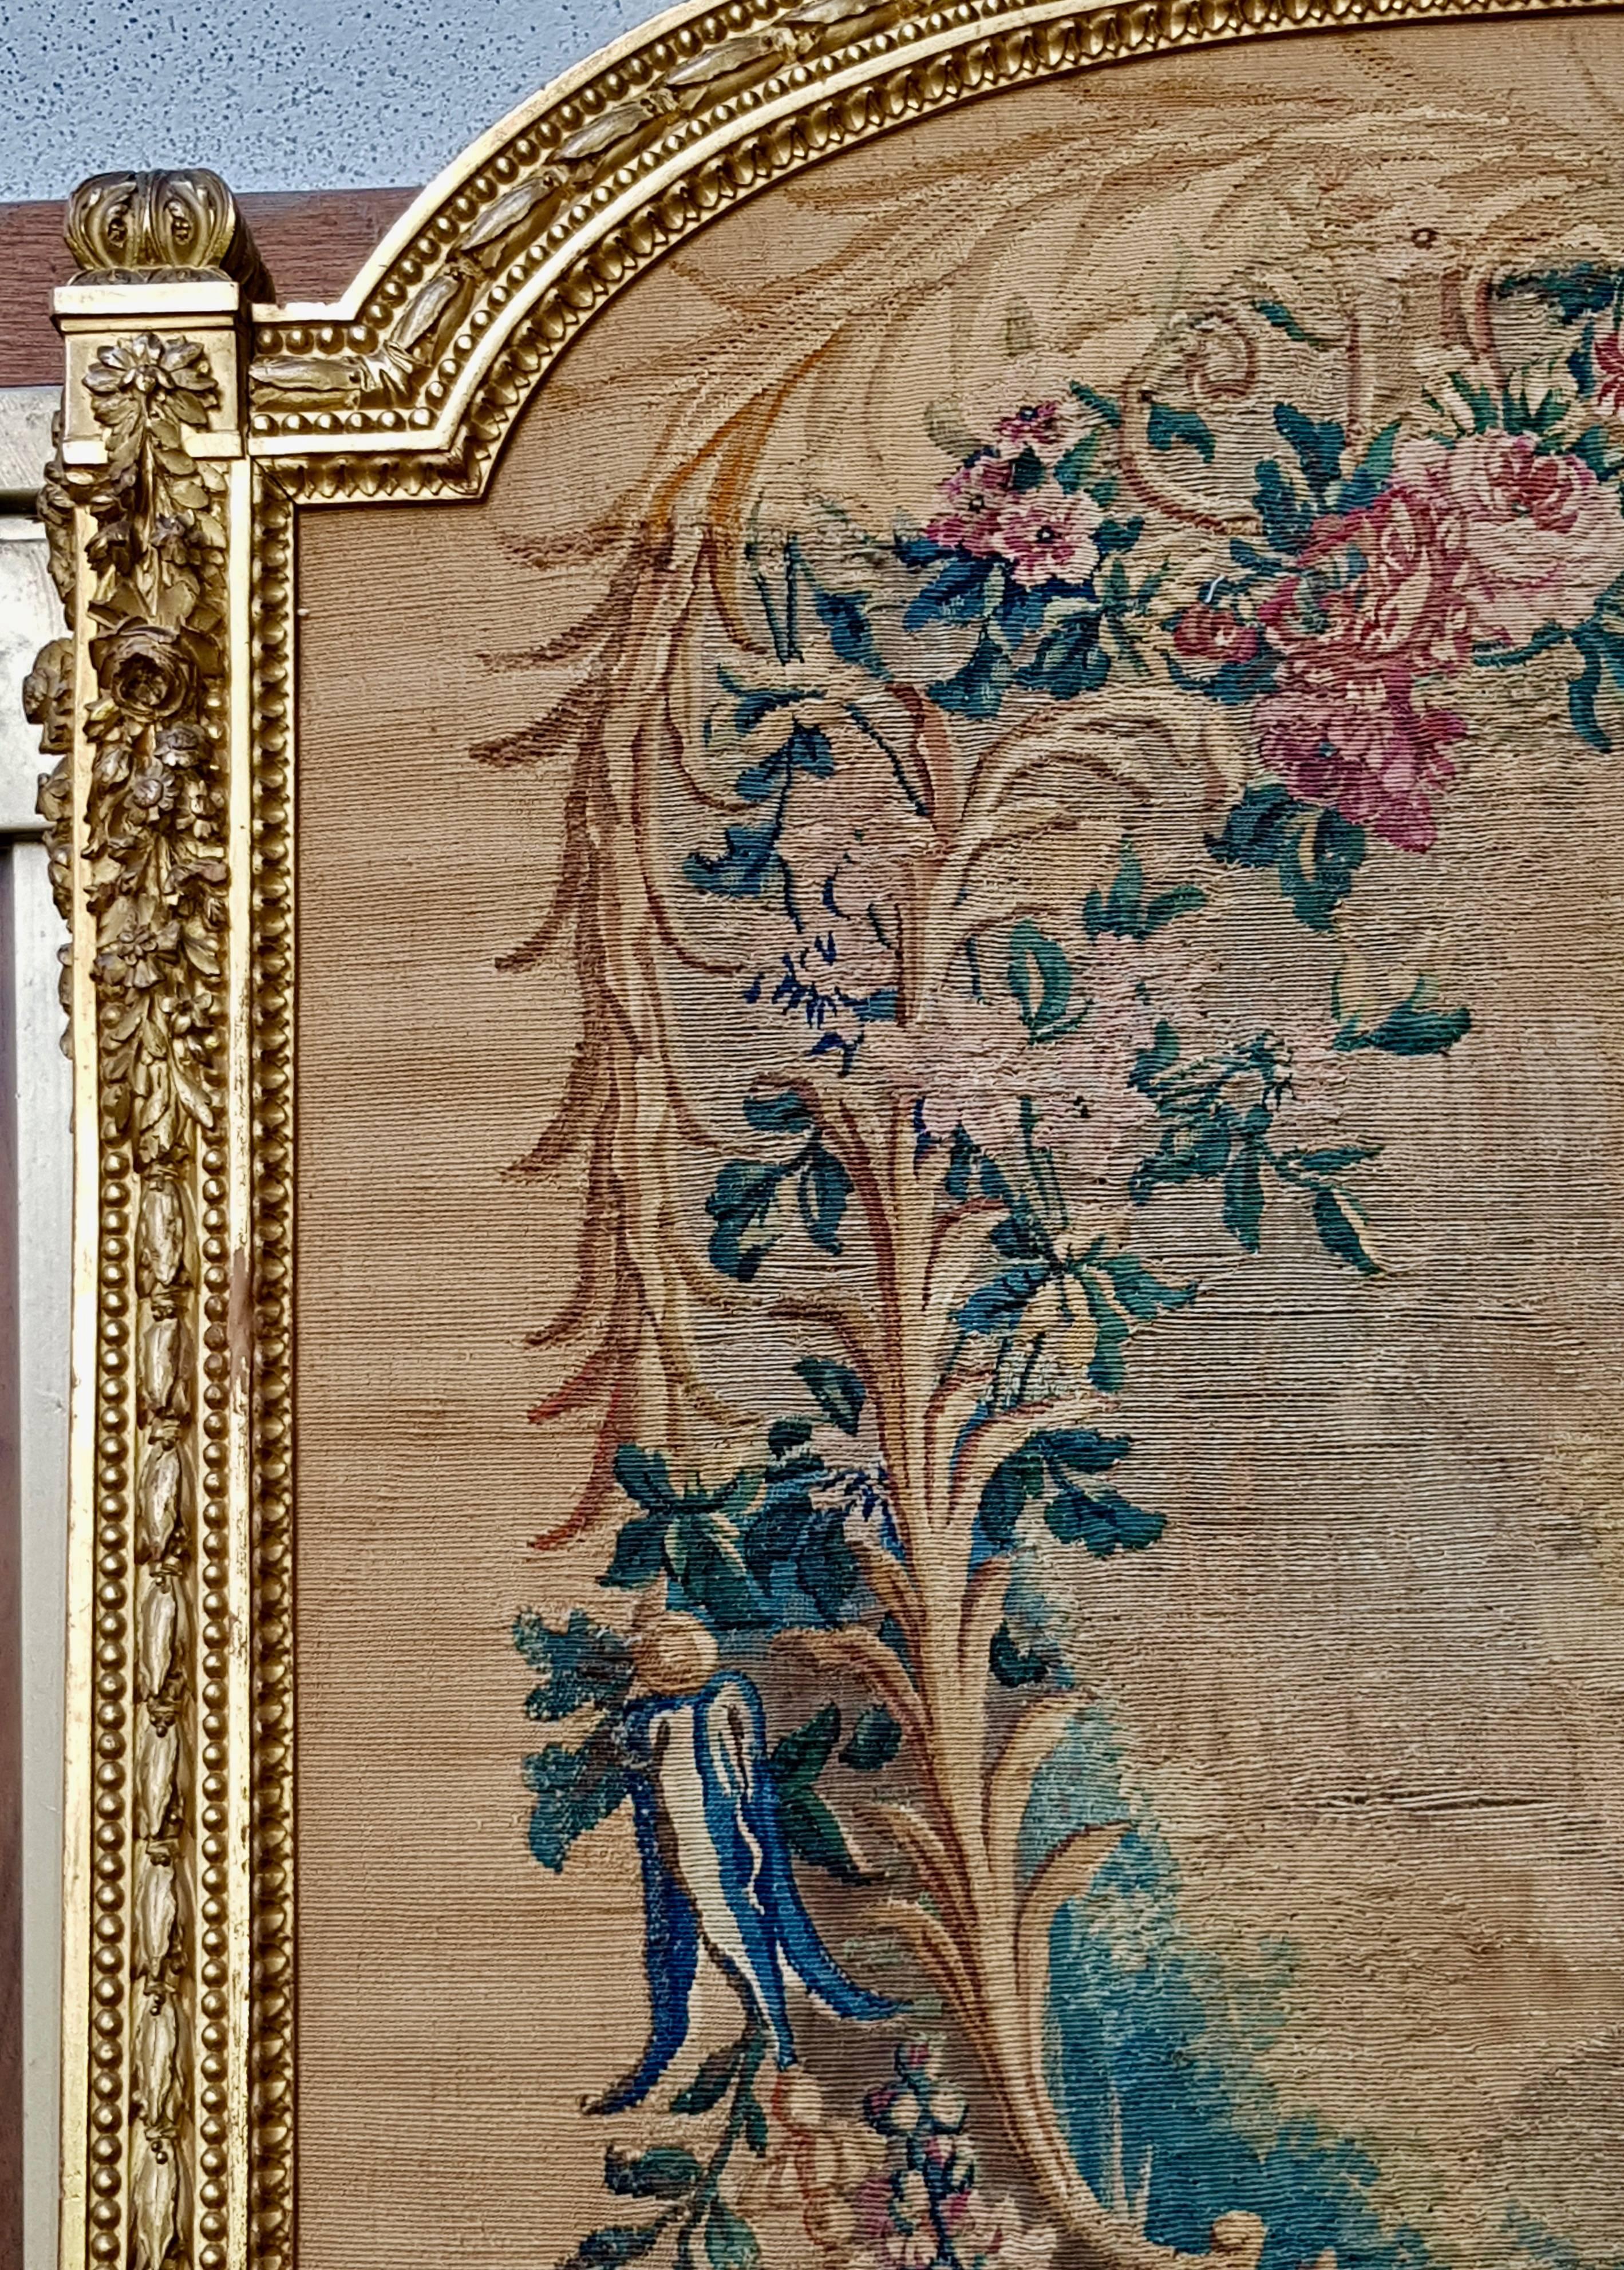 19th Century Aubusson Tapestry Panel in Original Giltwood Frame 4